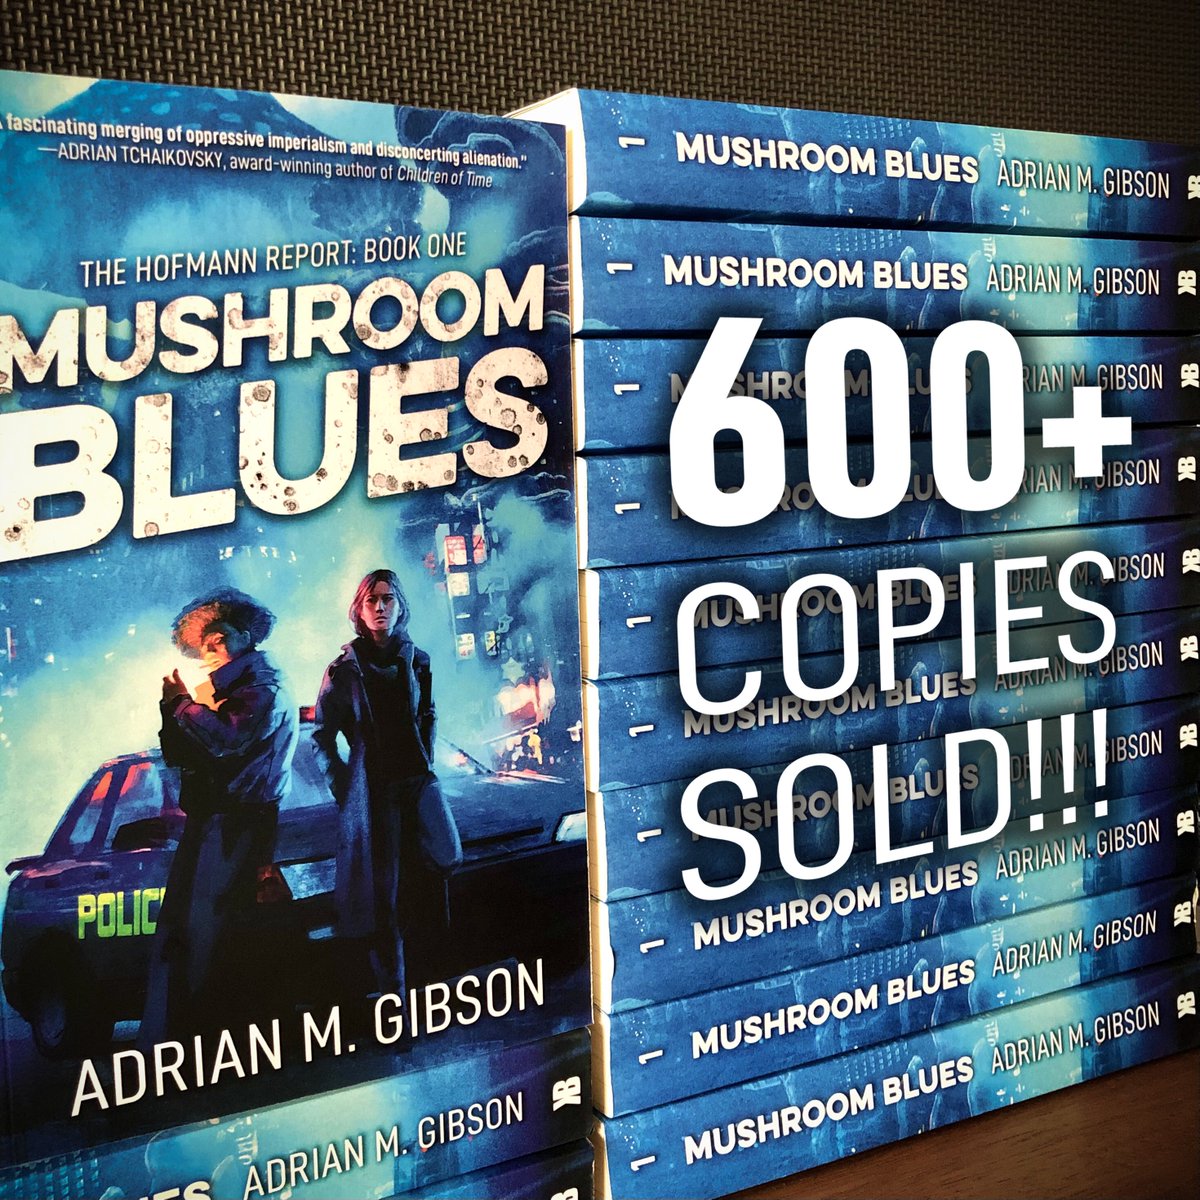 My debut novel #MushroomBlues has sold 600+ copies in 7 weeks 😱 I’m continually blown away by the support. Thank you all 🍄💙

If you haven’t got a copy yet, BUY ONE TODAY👇
Paperback: amzn.to/3VoOBNF
Hardcover: amzn.to/3vs5nAO
eBook/KU: a.co/d/fIKaQ9q